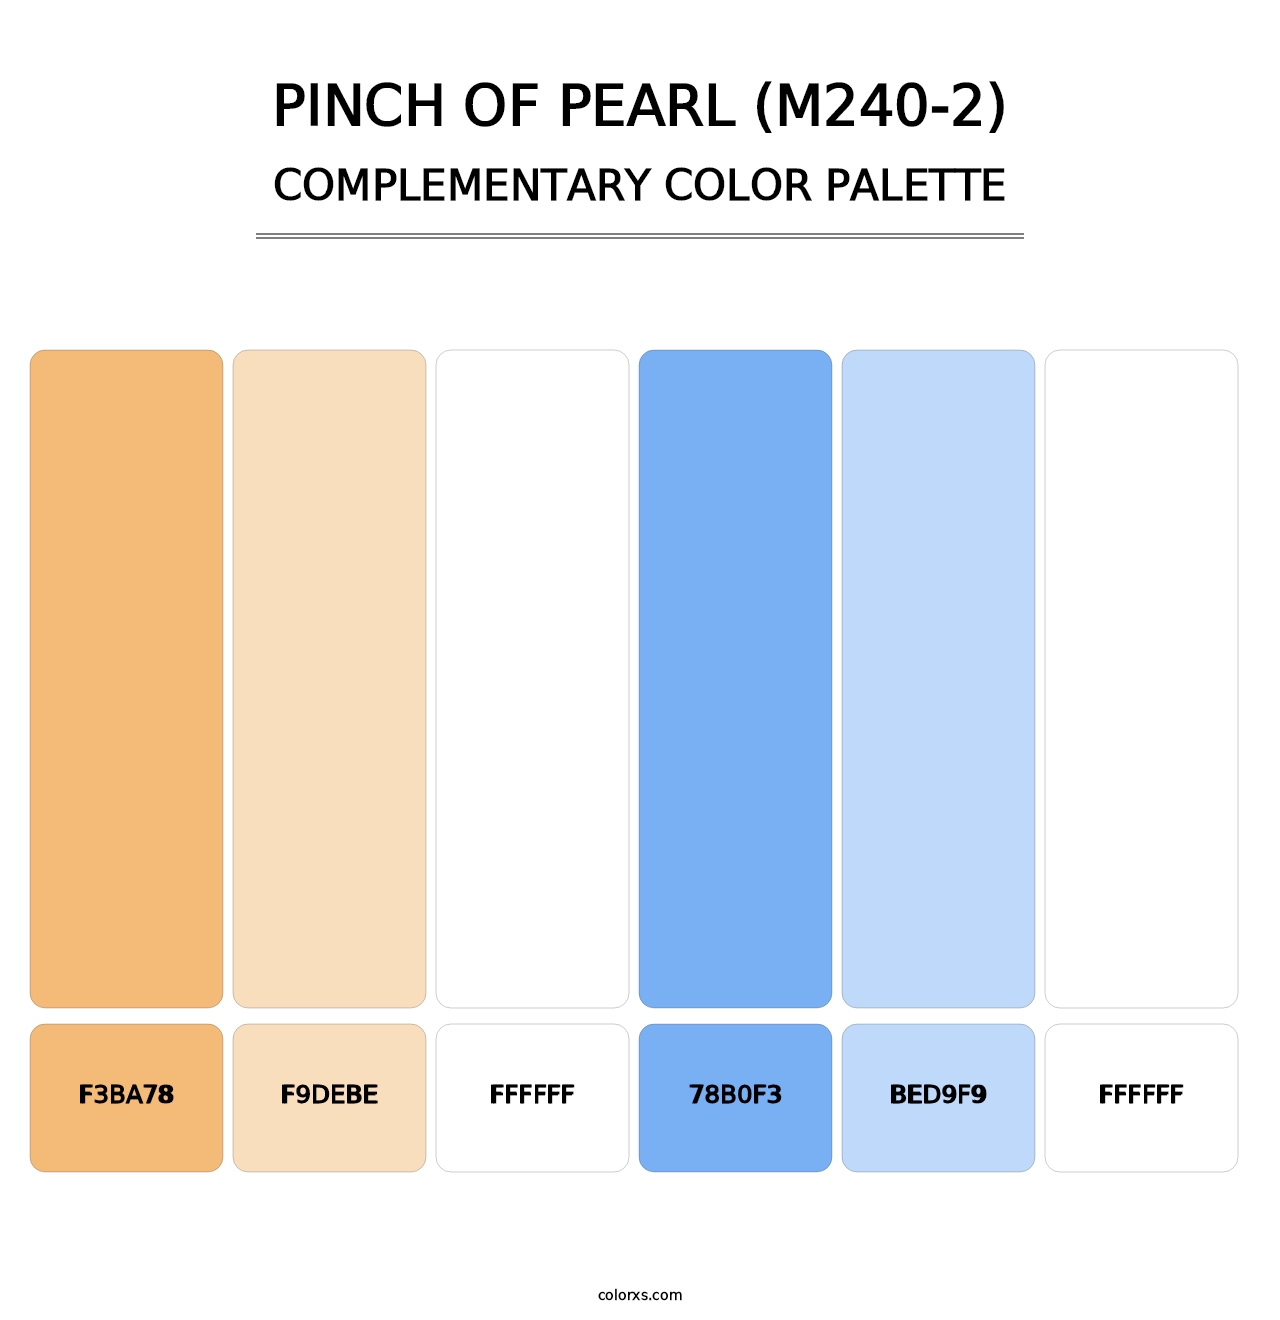 Pinch Of Pearl (M240-2) - Complementary Color Palette